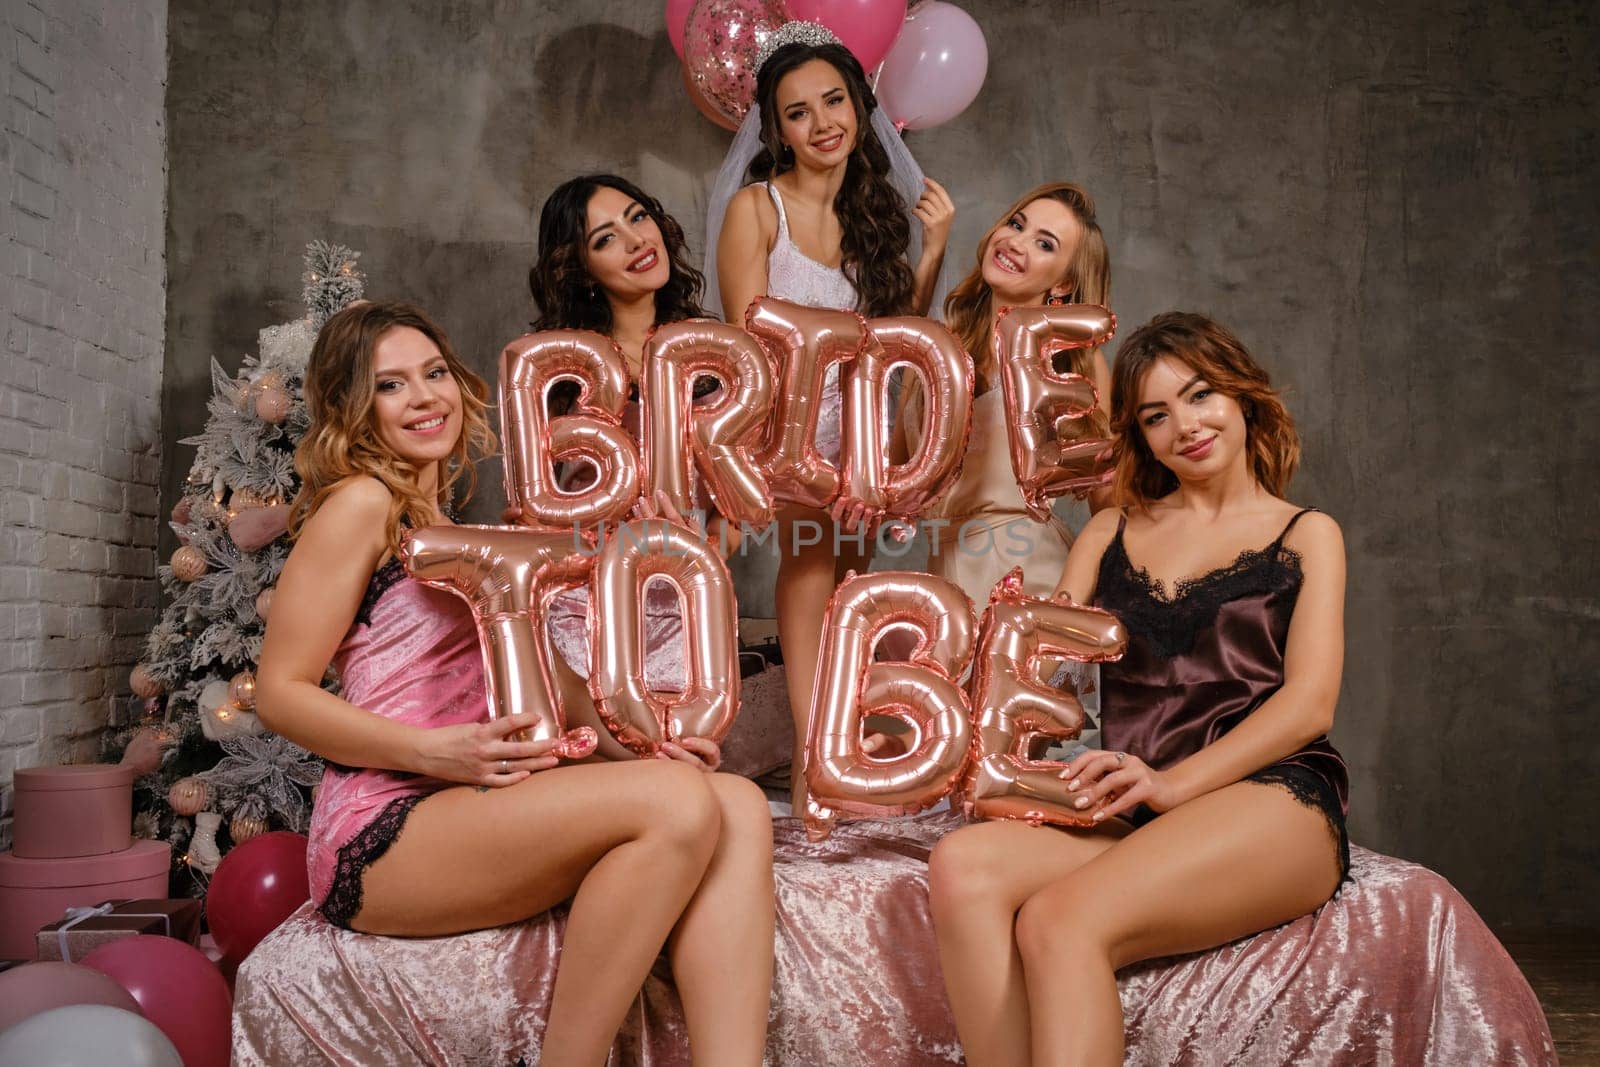 Pretty females in sexy lingerie and bride in veil, enjoying hen-party, sitting on bed, smiling, holding balloons in form of letters, built sentence bride to be. Christmas tree, decorations. Close-up.